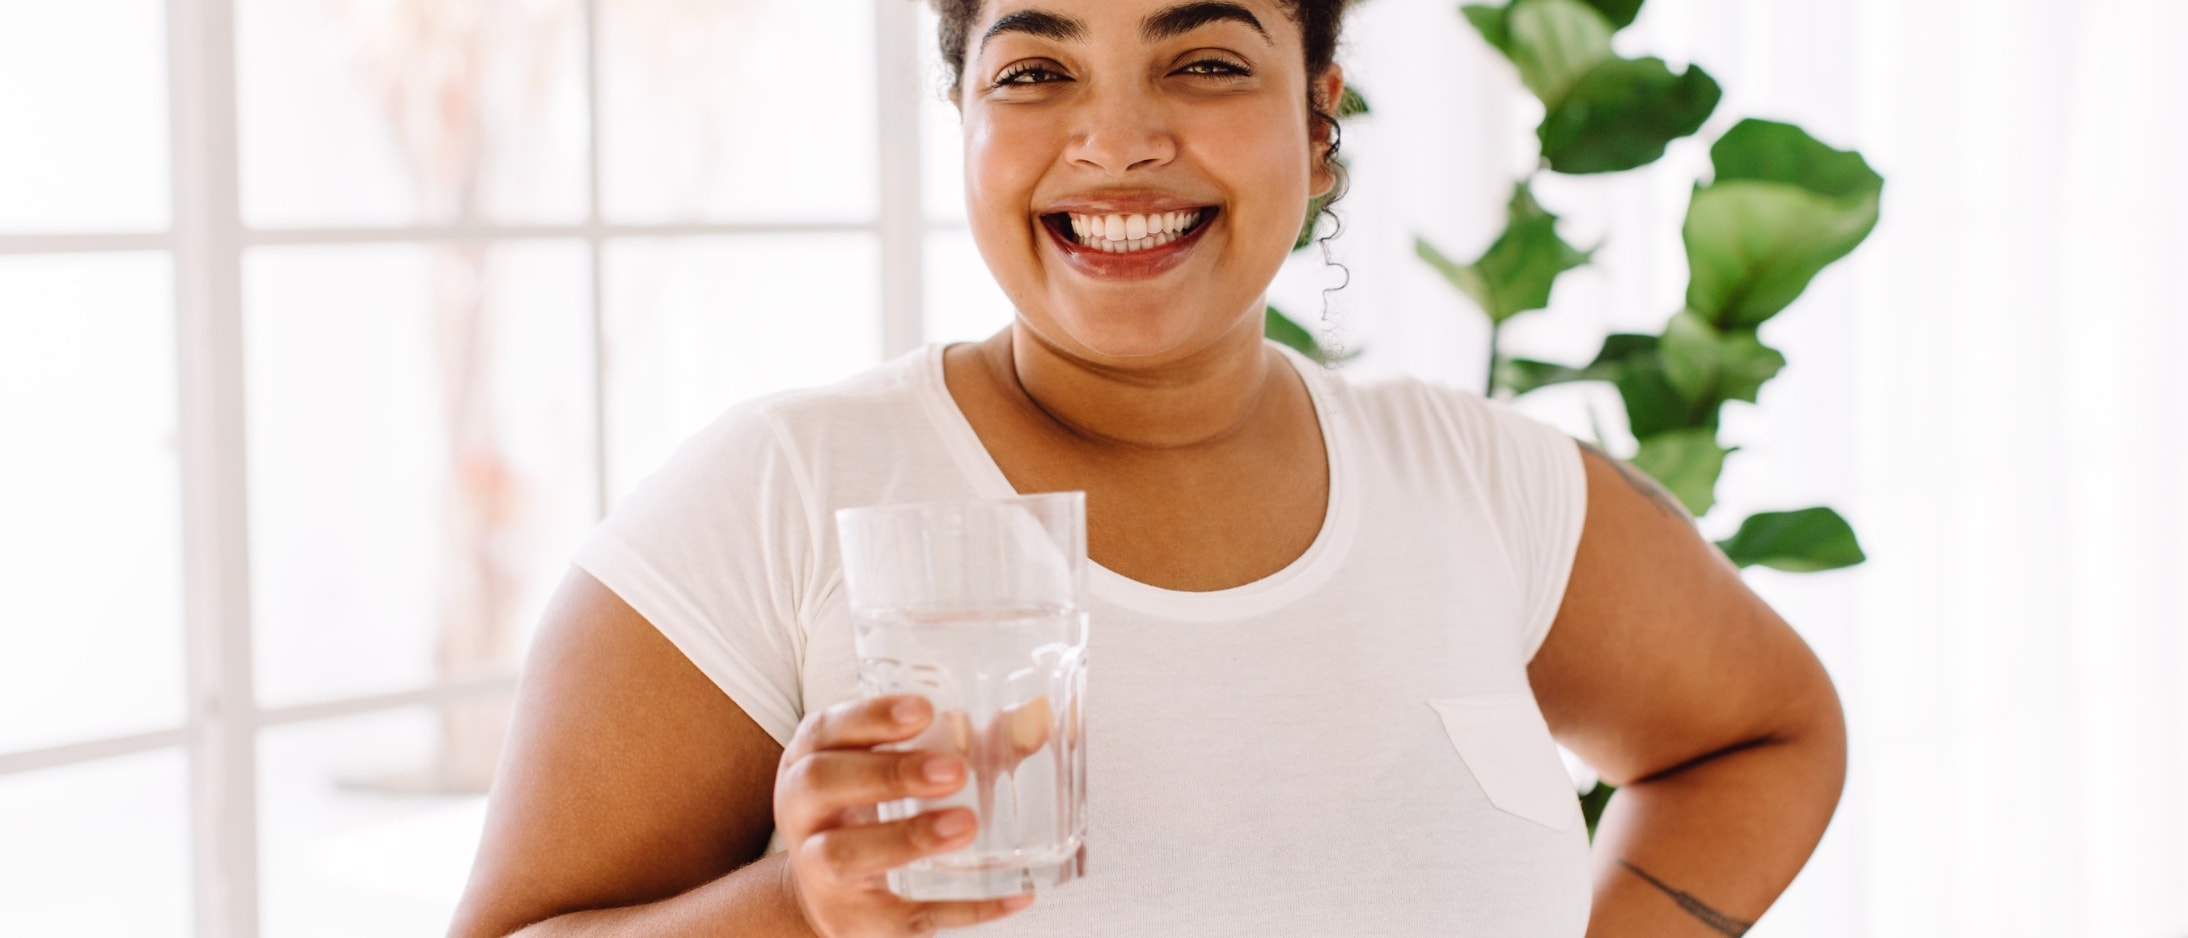 African American woman holding a glass of water